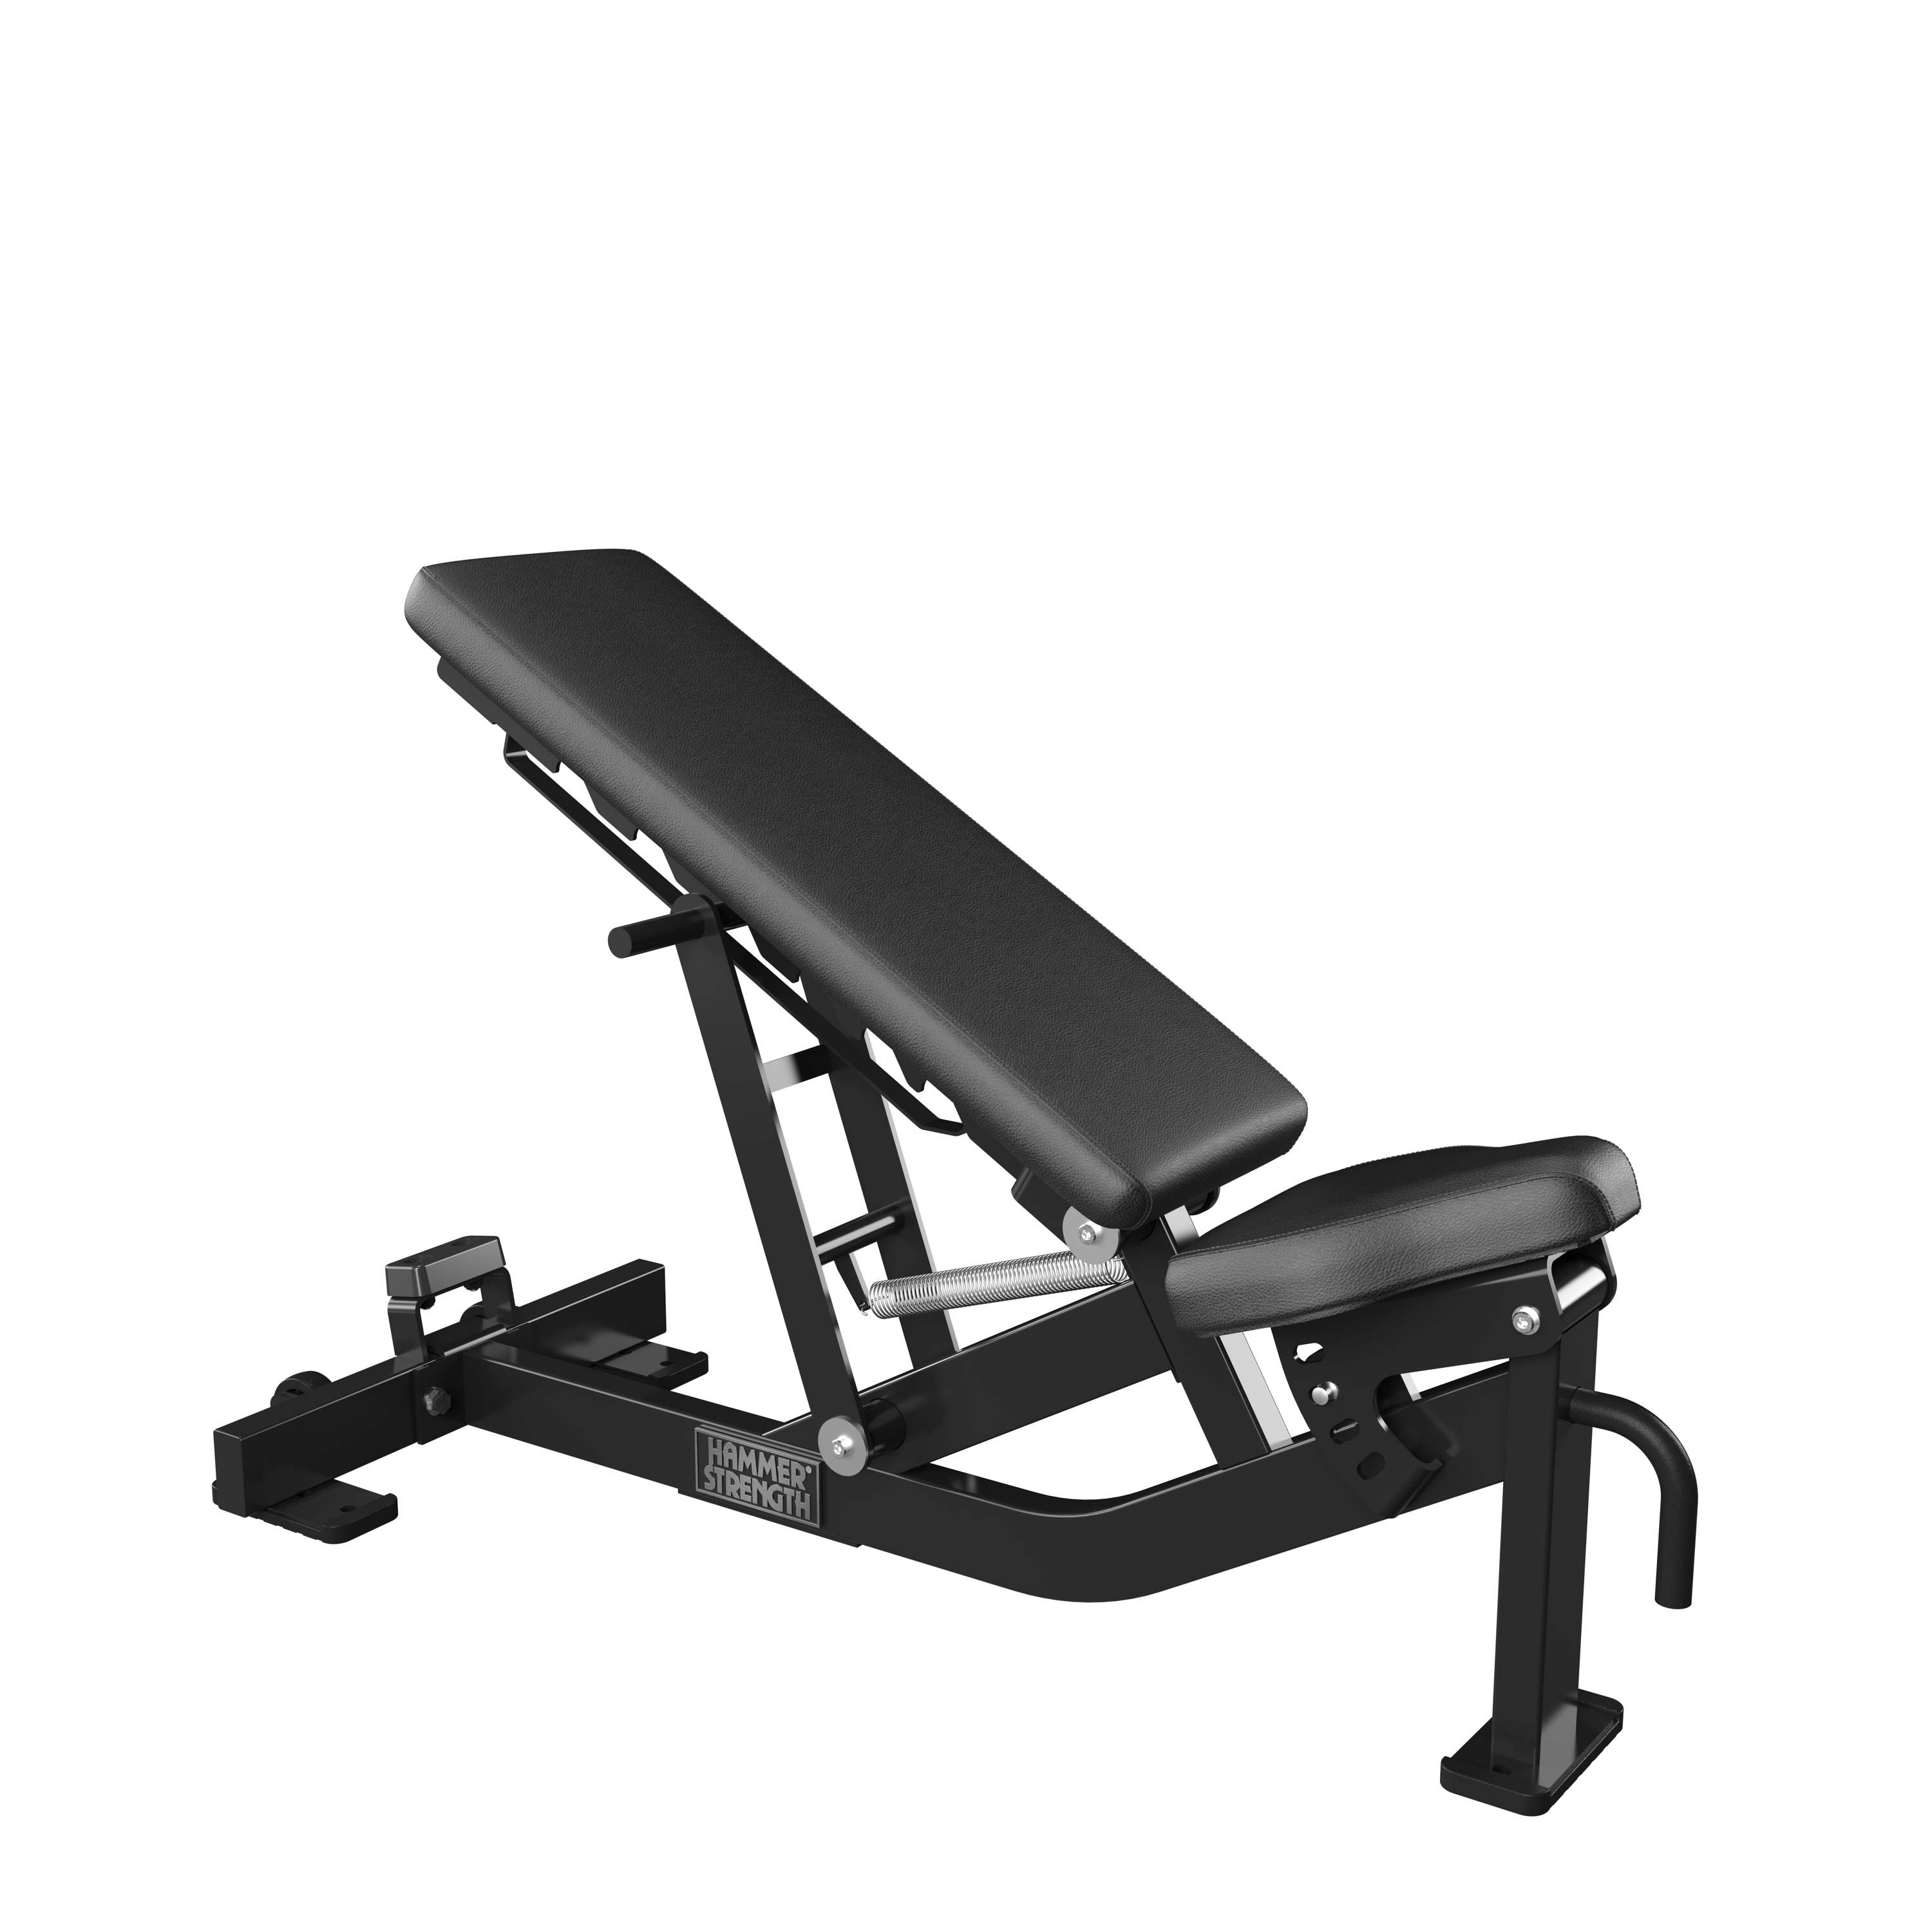 https://shop.lifefitness.com/products/hammer-strength-home-multi-adjustable-bench